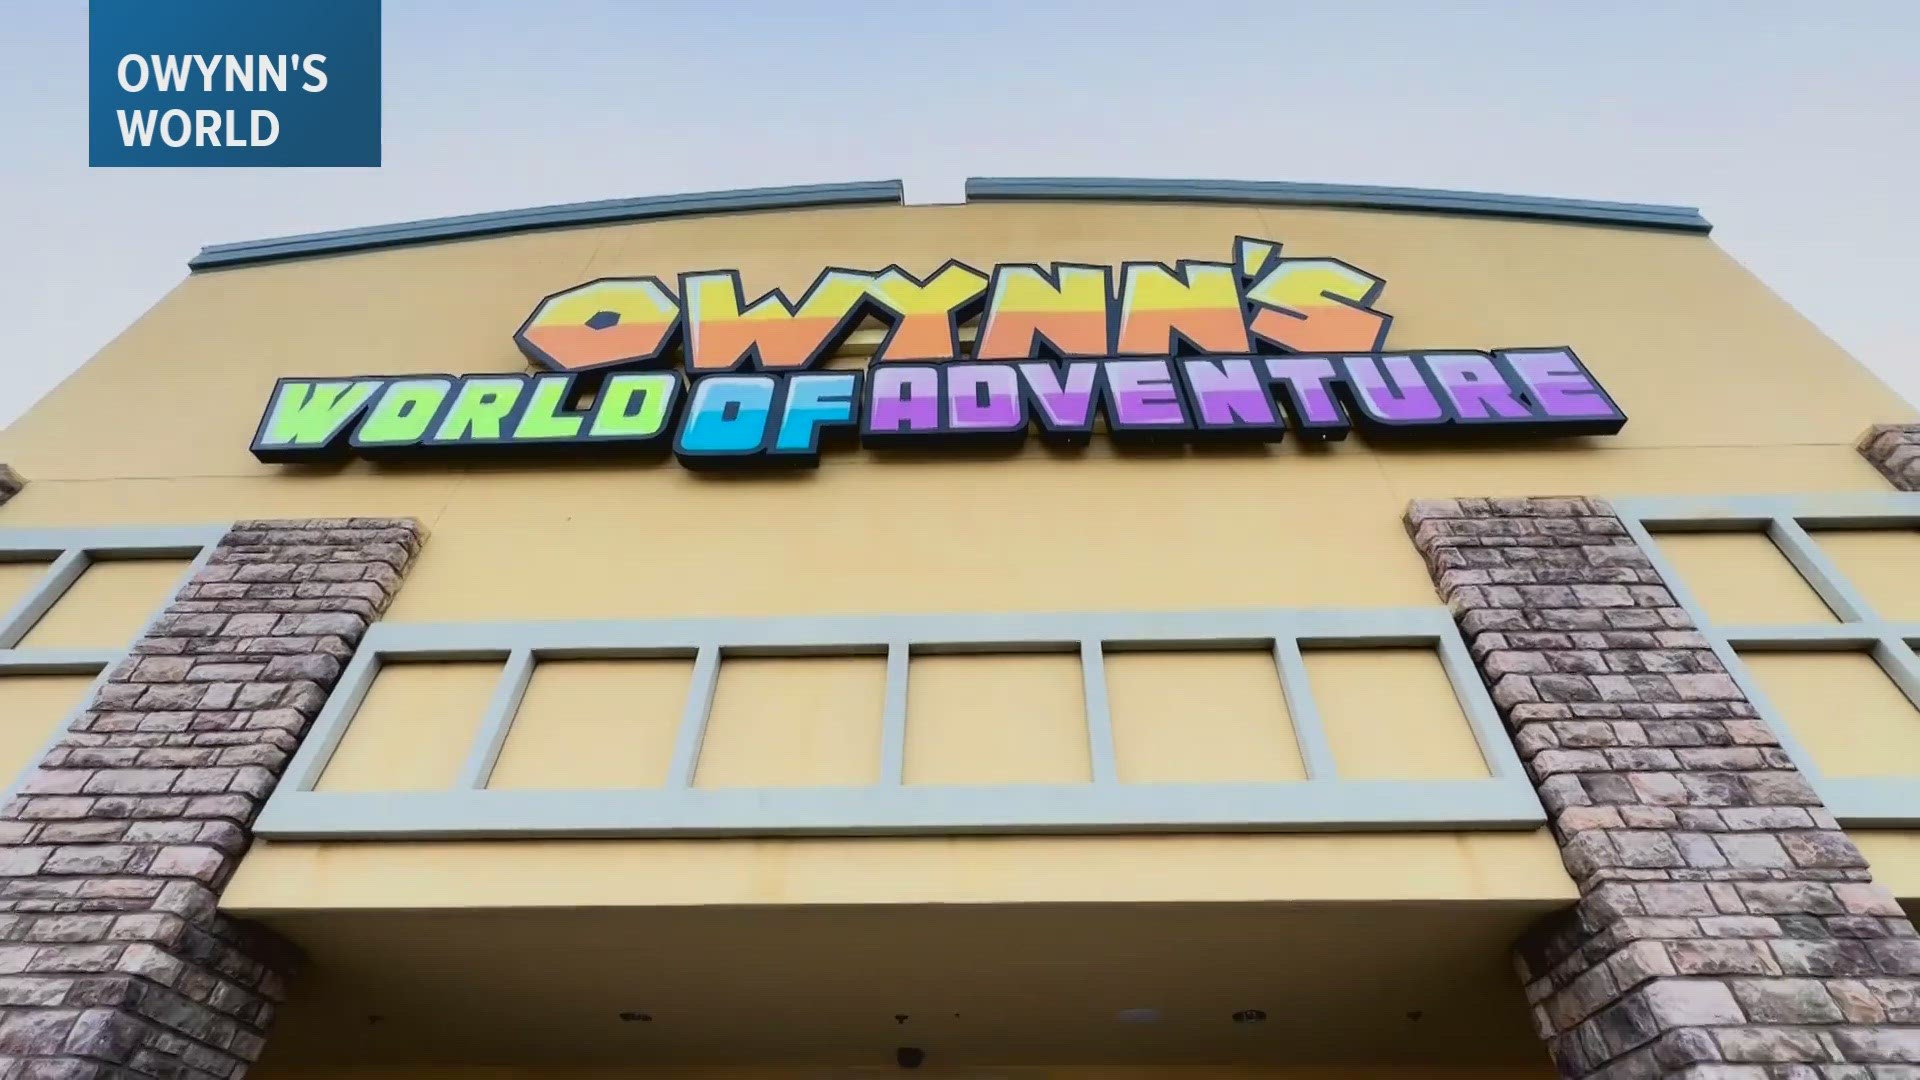 Owynn's World of Adventure in Litchfield Park combines everything from arcade and carnival classics to the latest in v-r technology.